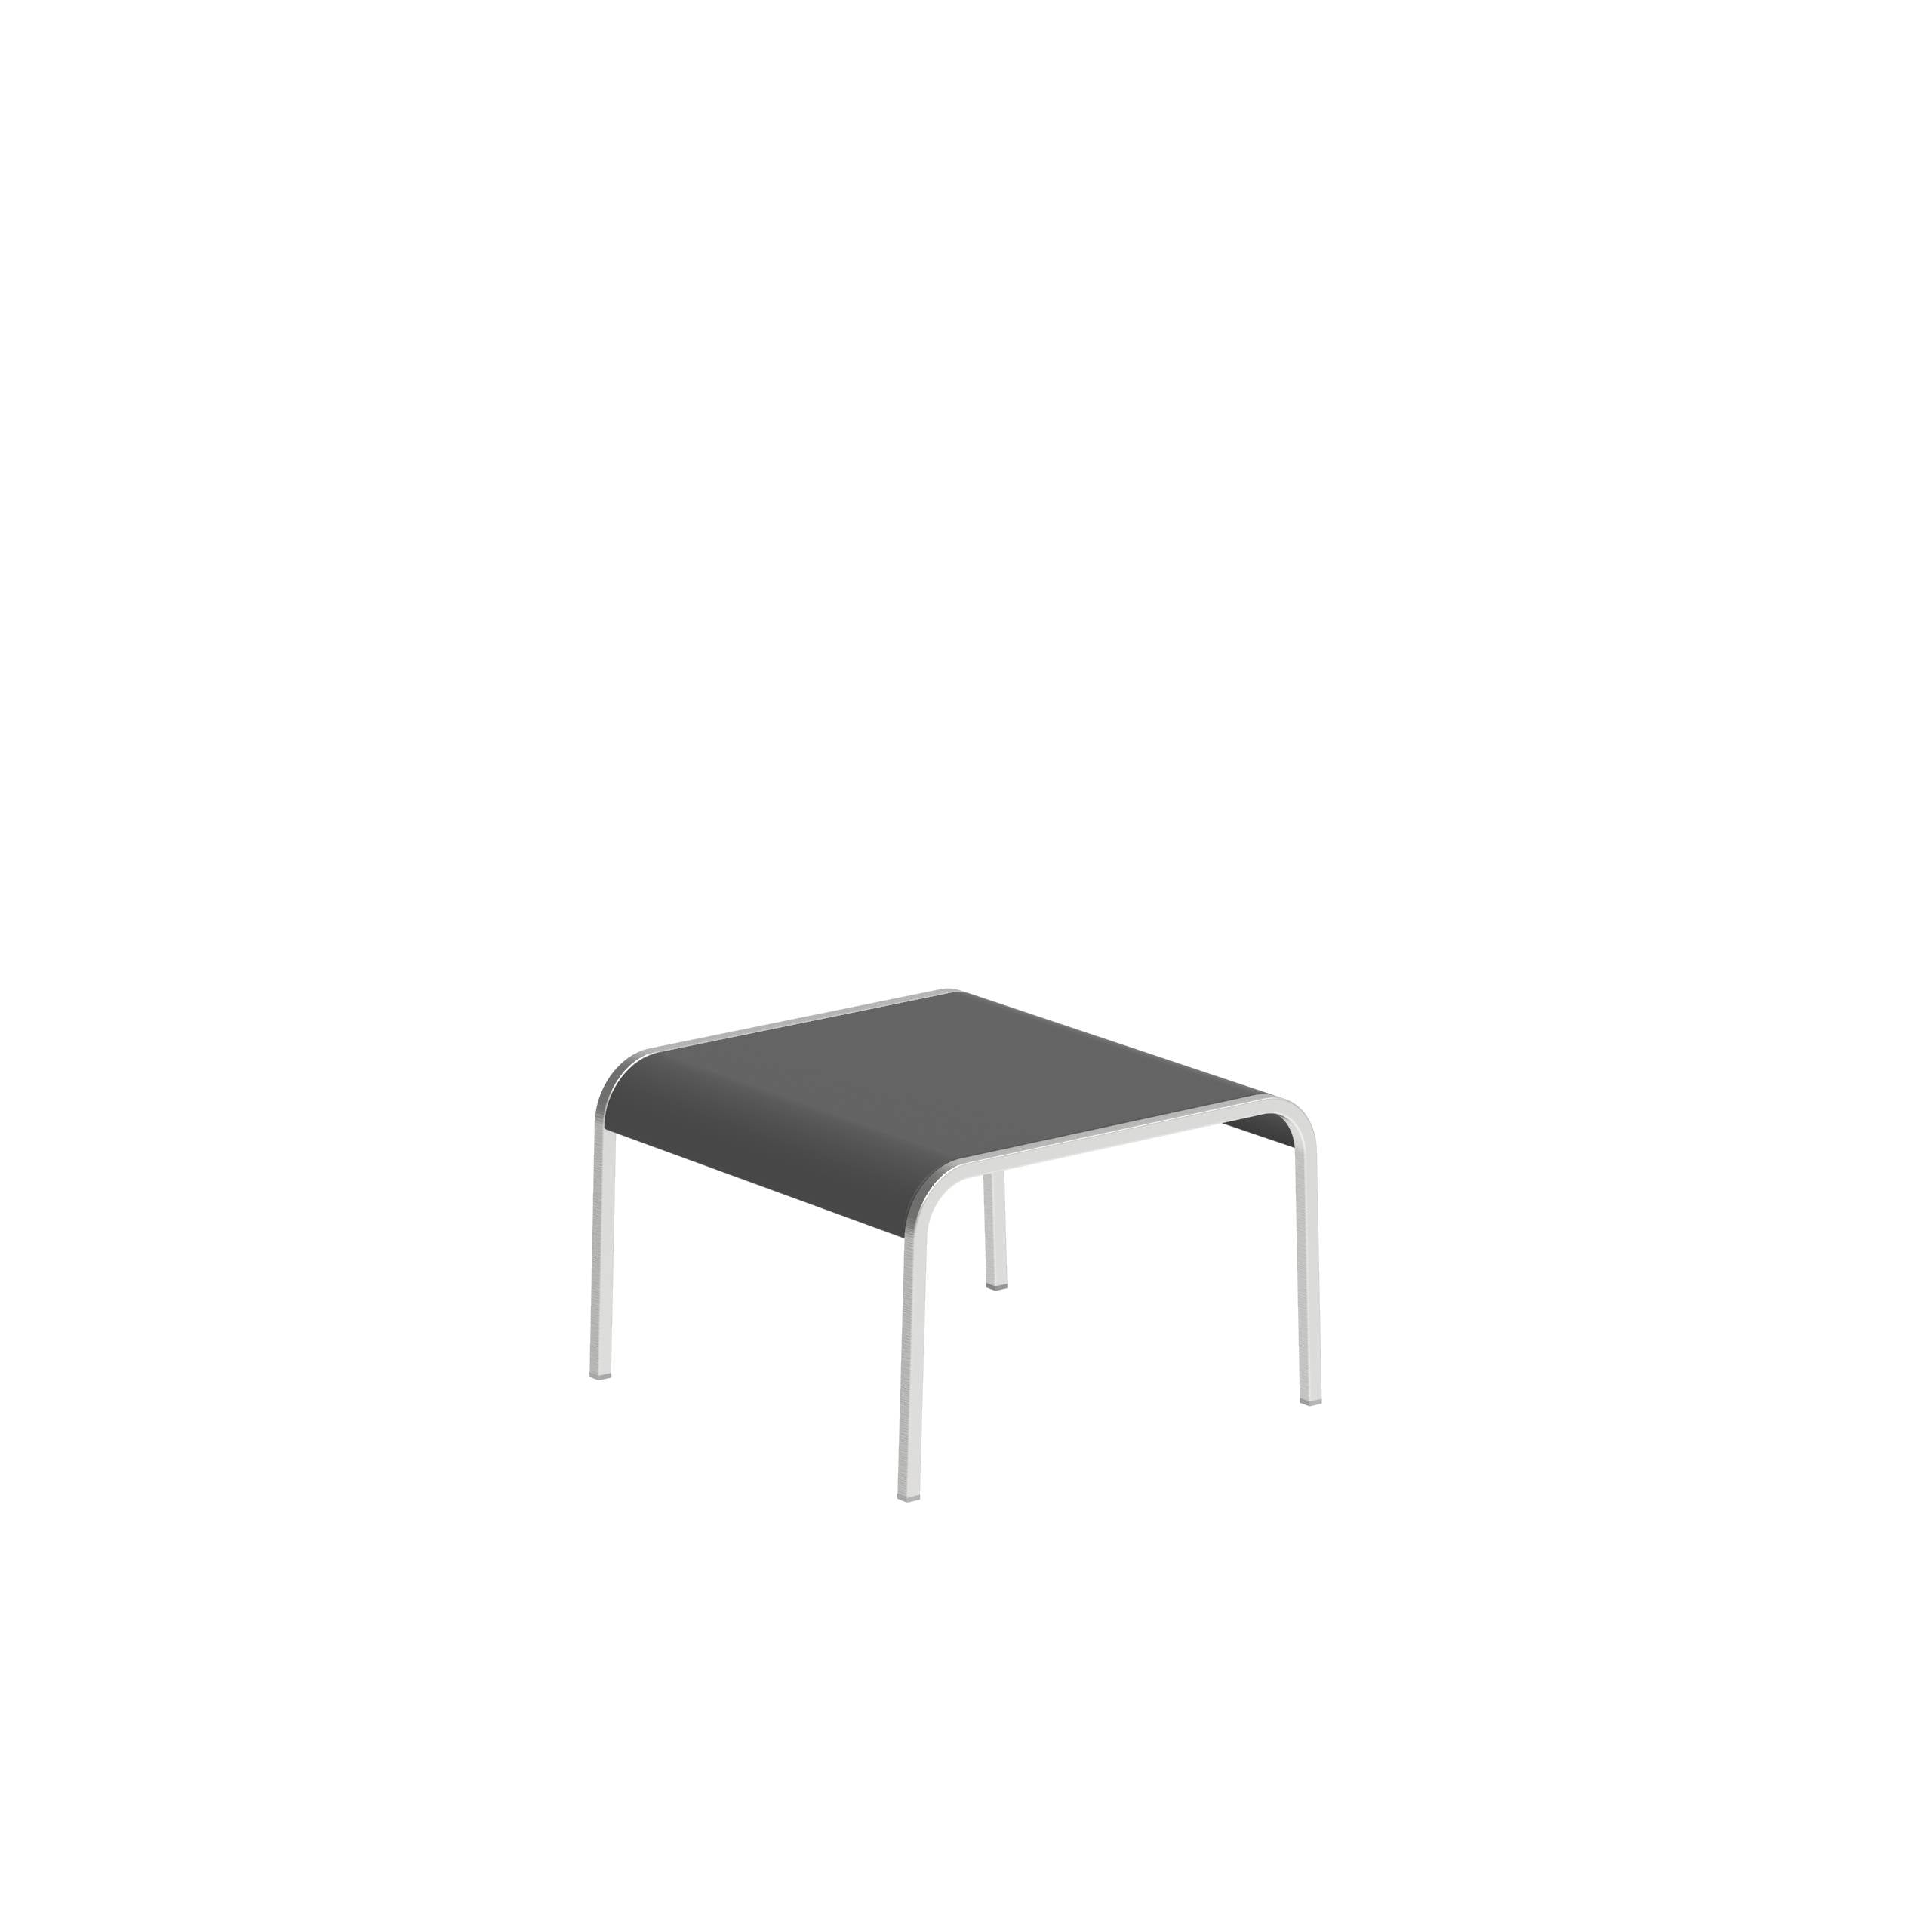 Qt50 Side Table 50x50cm With Alu Top Black